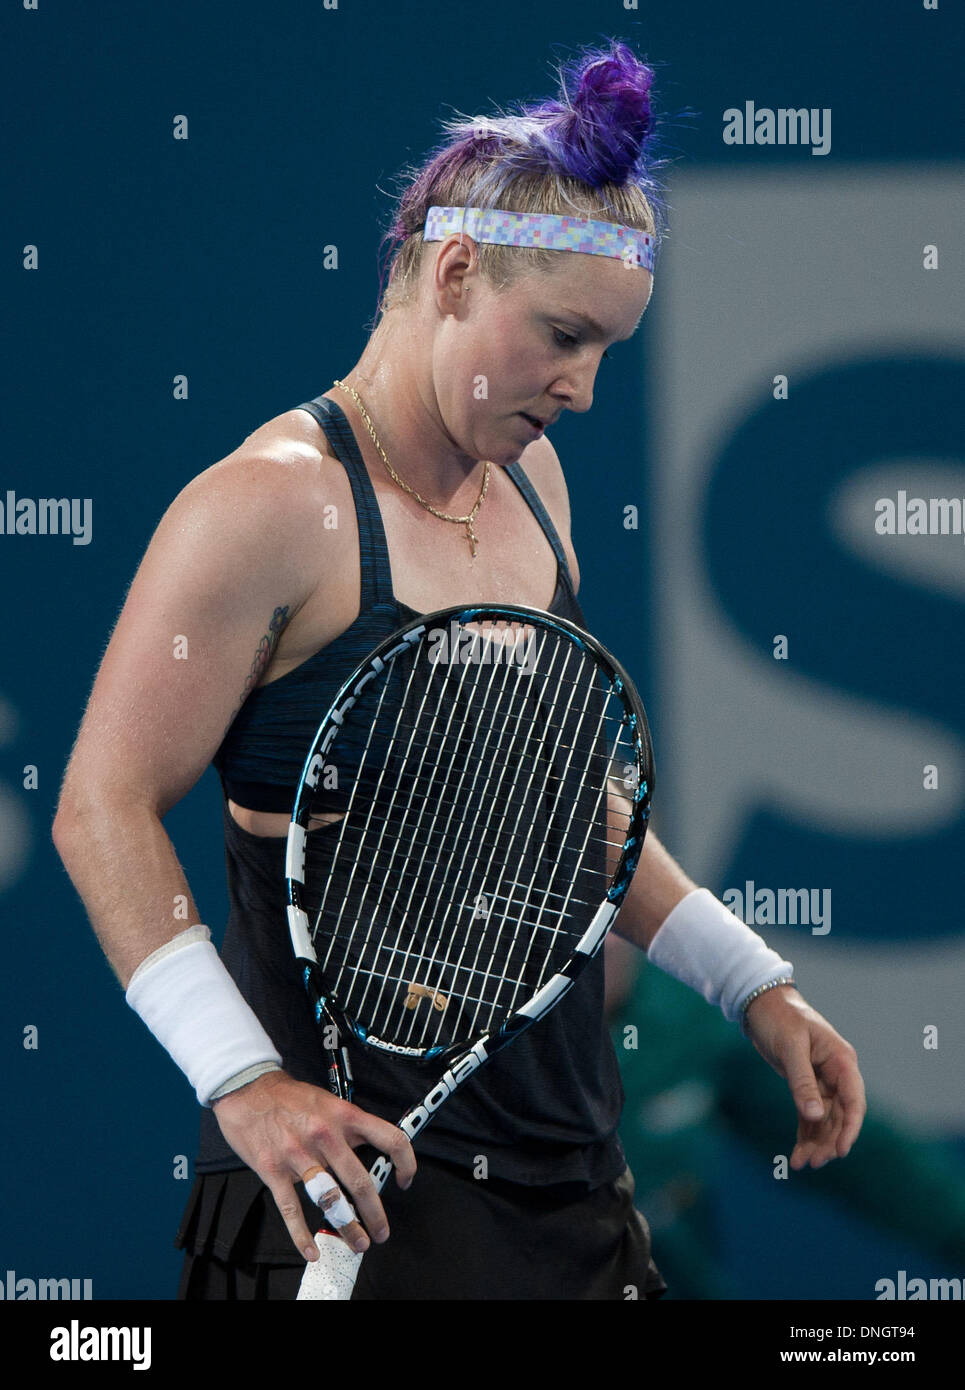 Brisbane, Australia. 29th Dec, 2013. Bethanie Mattek-Sands of the U.S. reacts during her women's singles first round match against Andrea Petkovic of Germany at Brisbane International Tennis Tournament in Brisbane, Australia, Dec. 29, 2013. Petkovic won 2-0. Credit:  Bai Xue/Xinhua/Alamy Live News Stock Photo